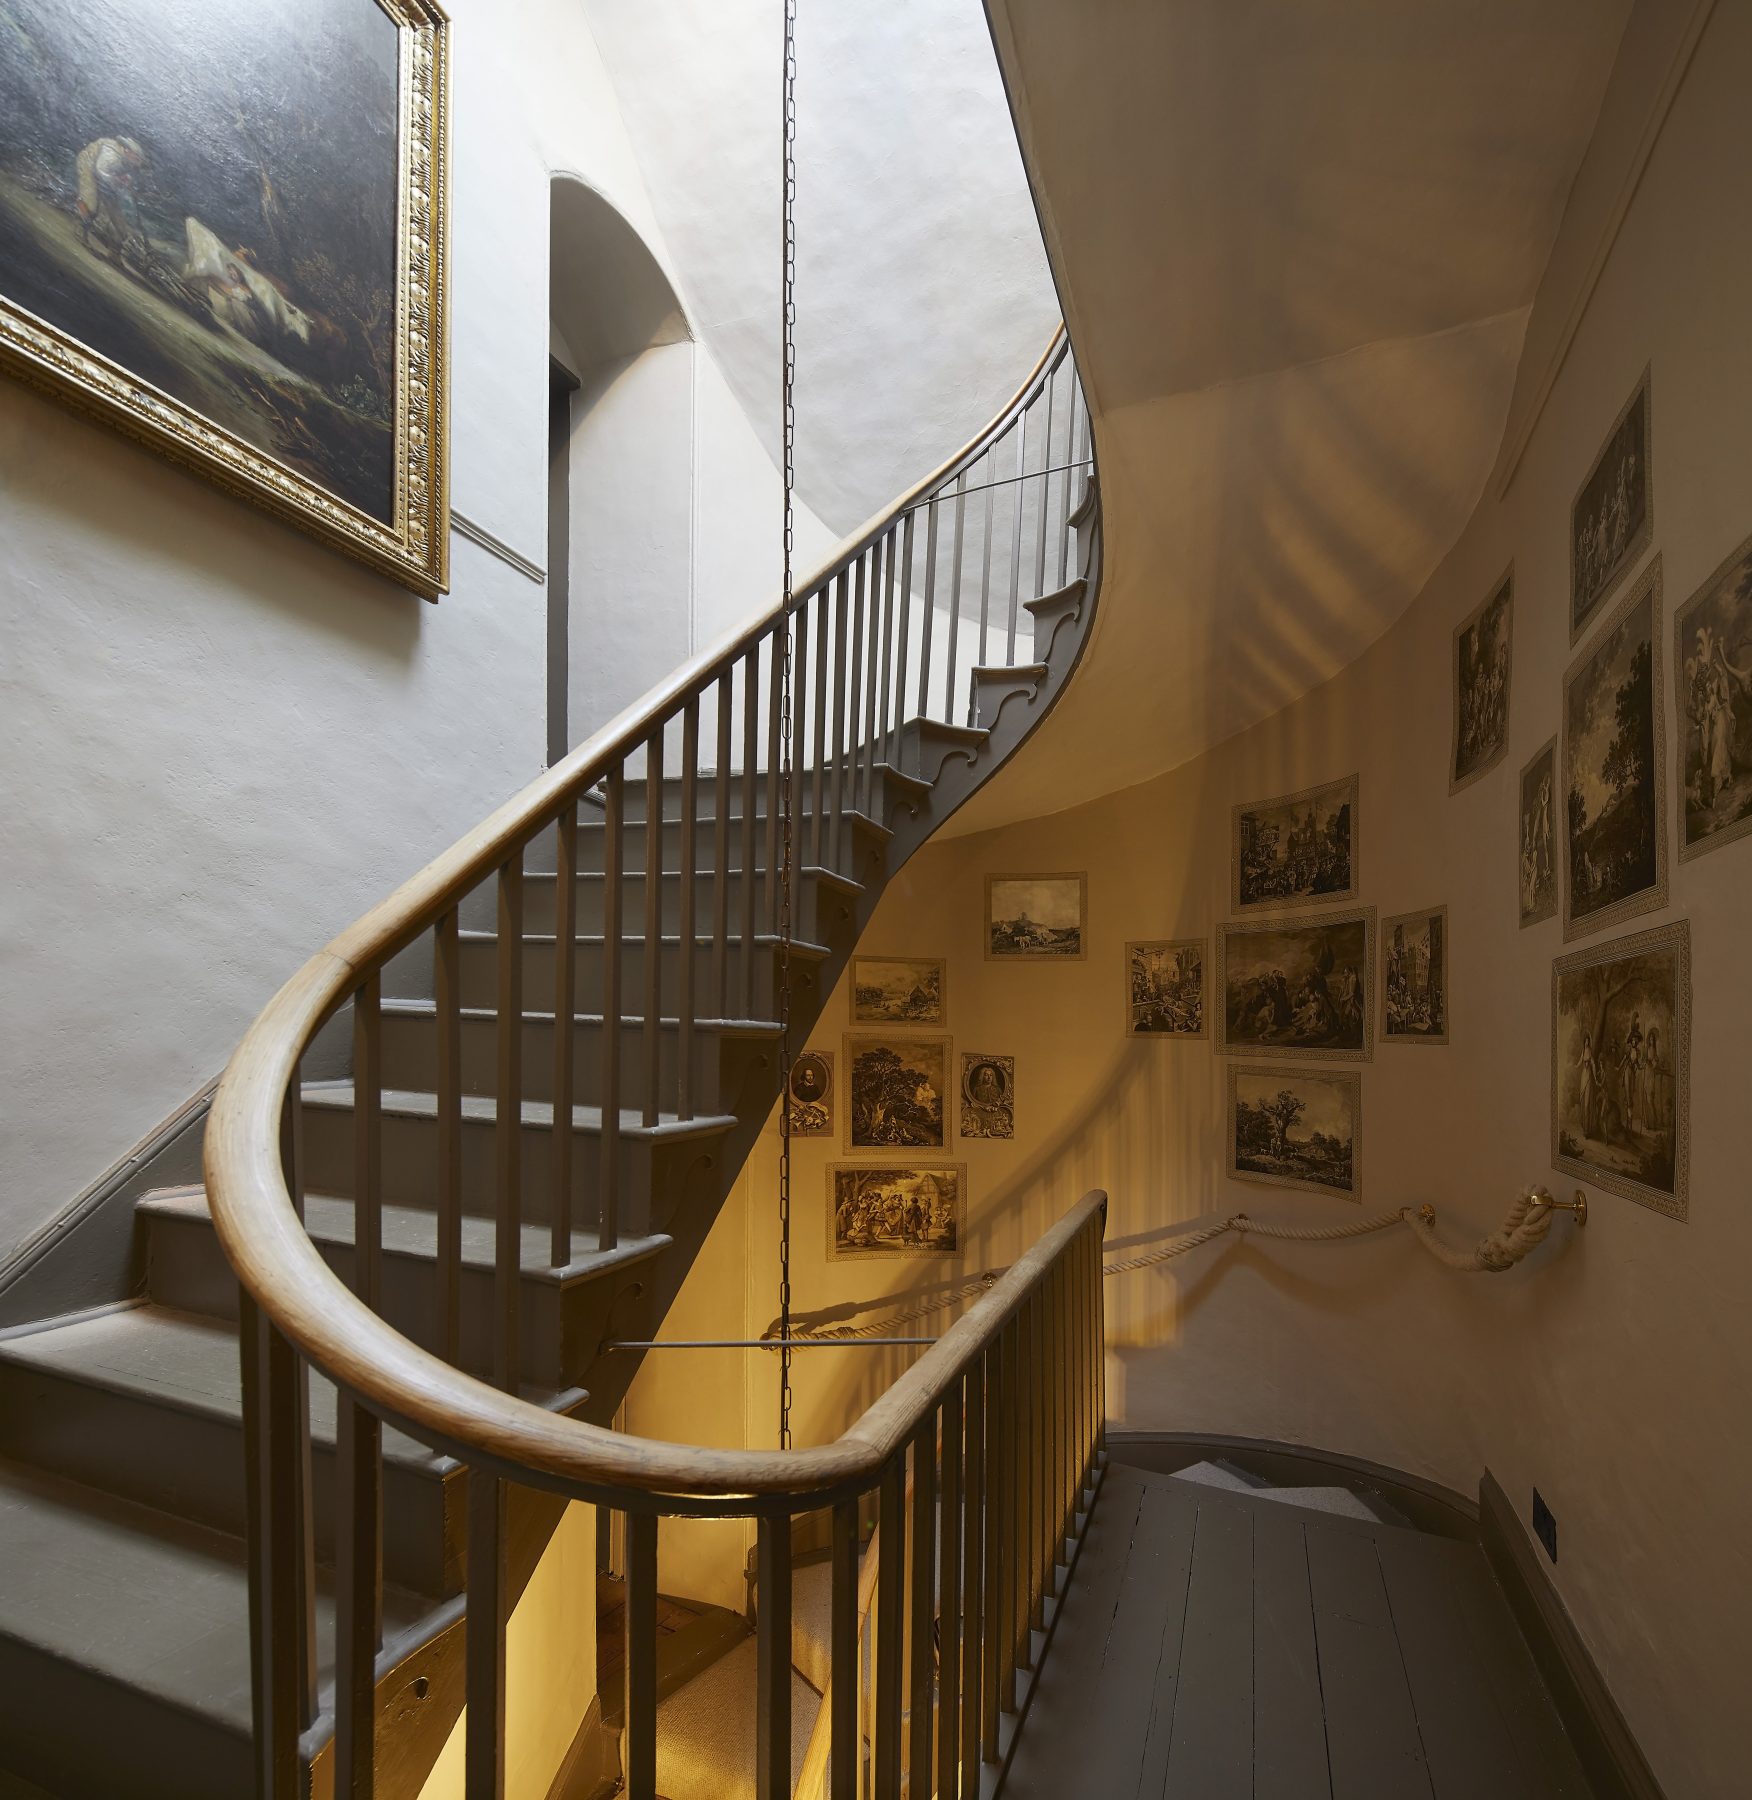 Stairwell at Gainsborough's House